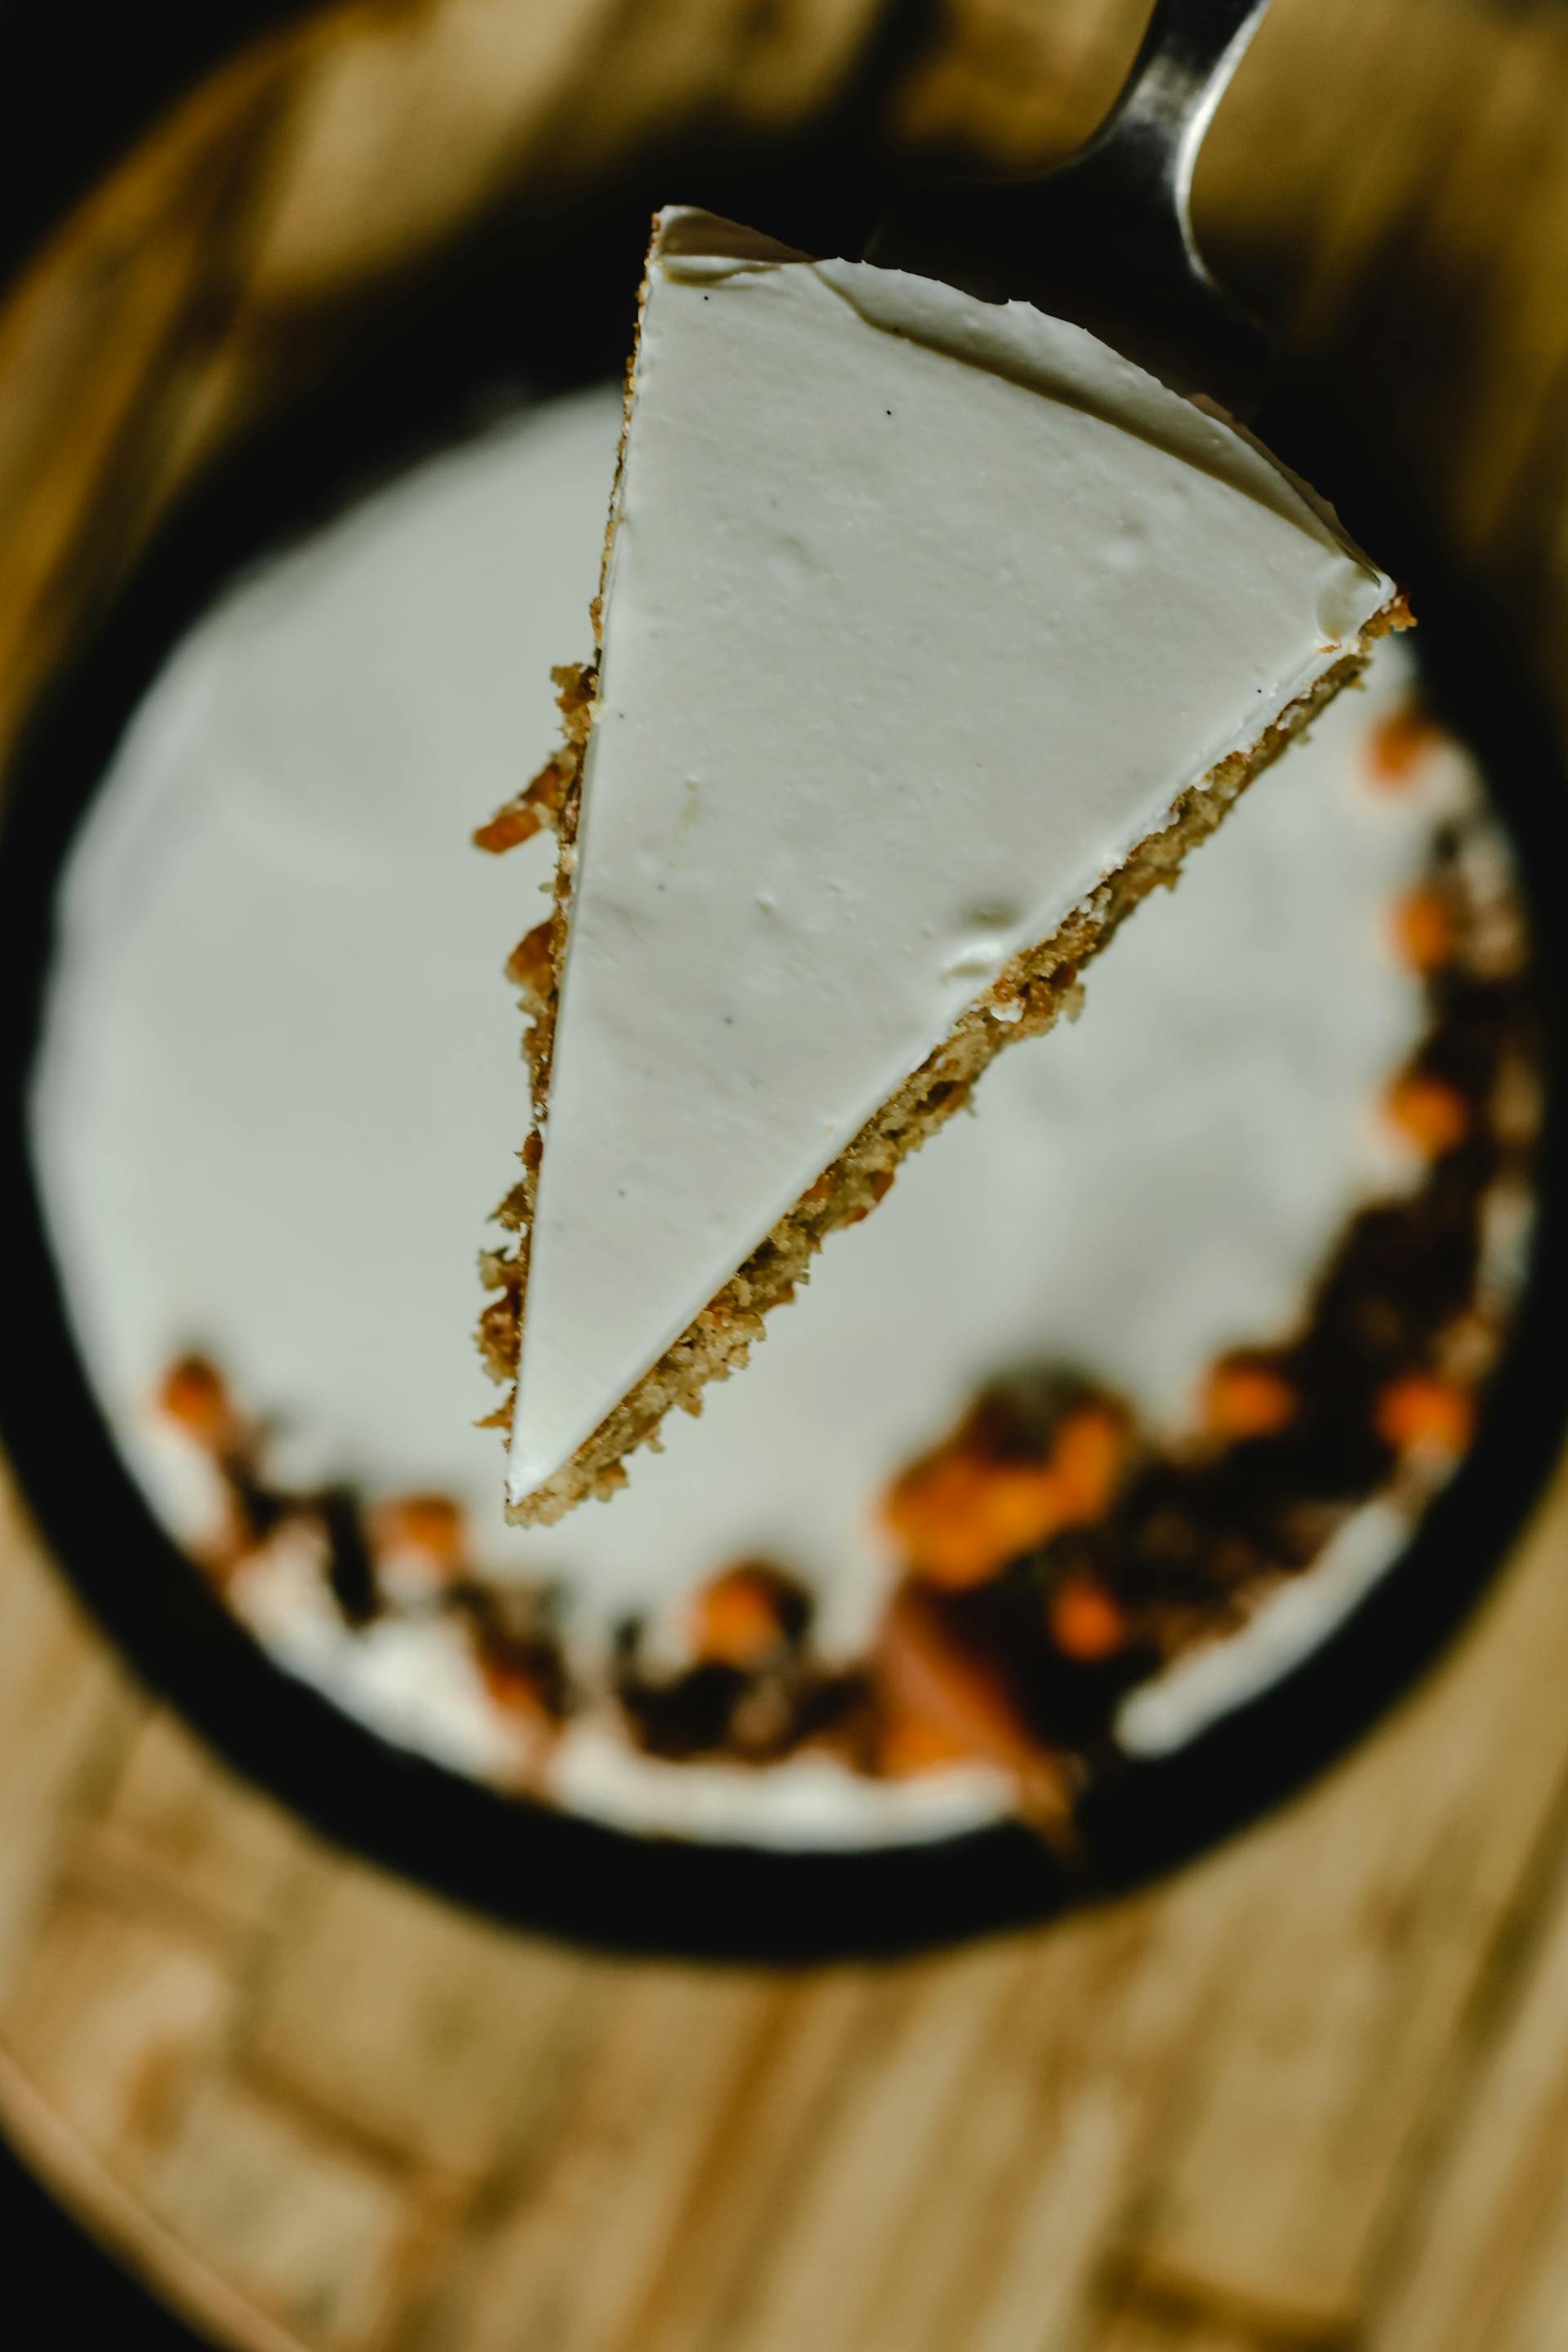 A top view of a slice of carrot cake | Source: Pexels